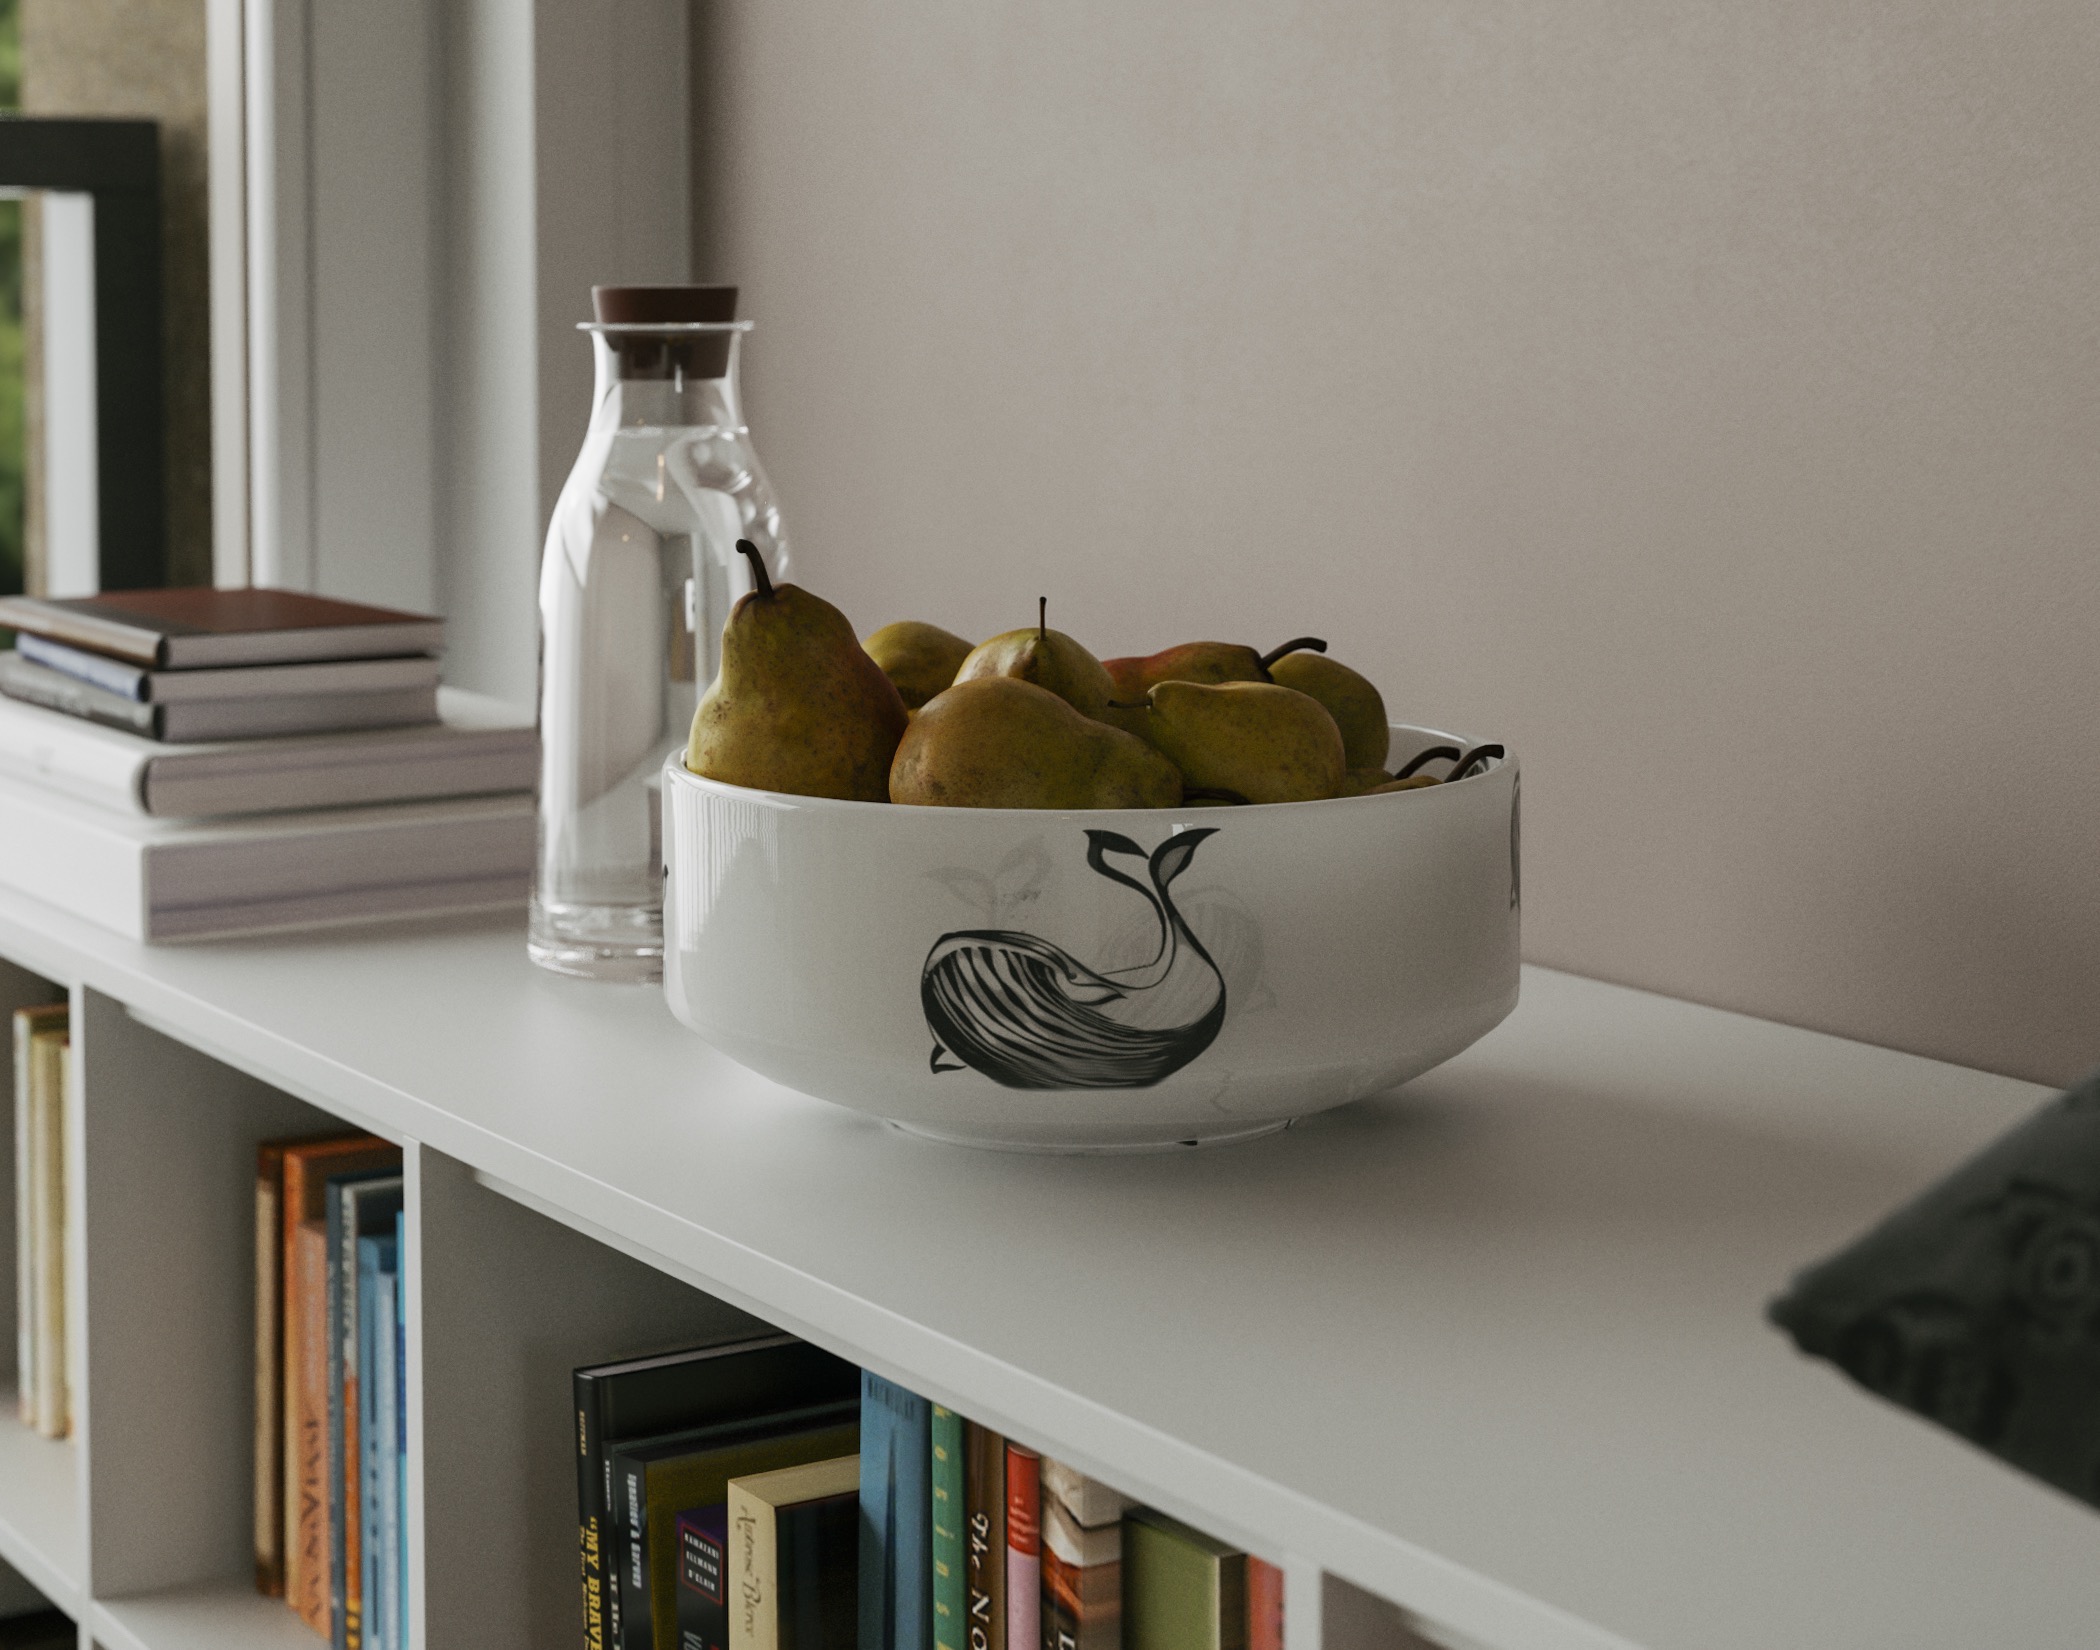  A Nautical-Inspired Fruit Bowl 